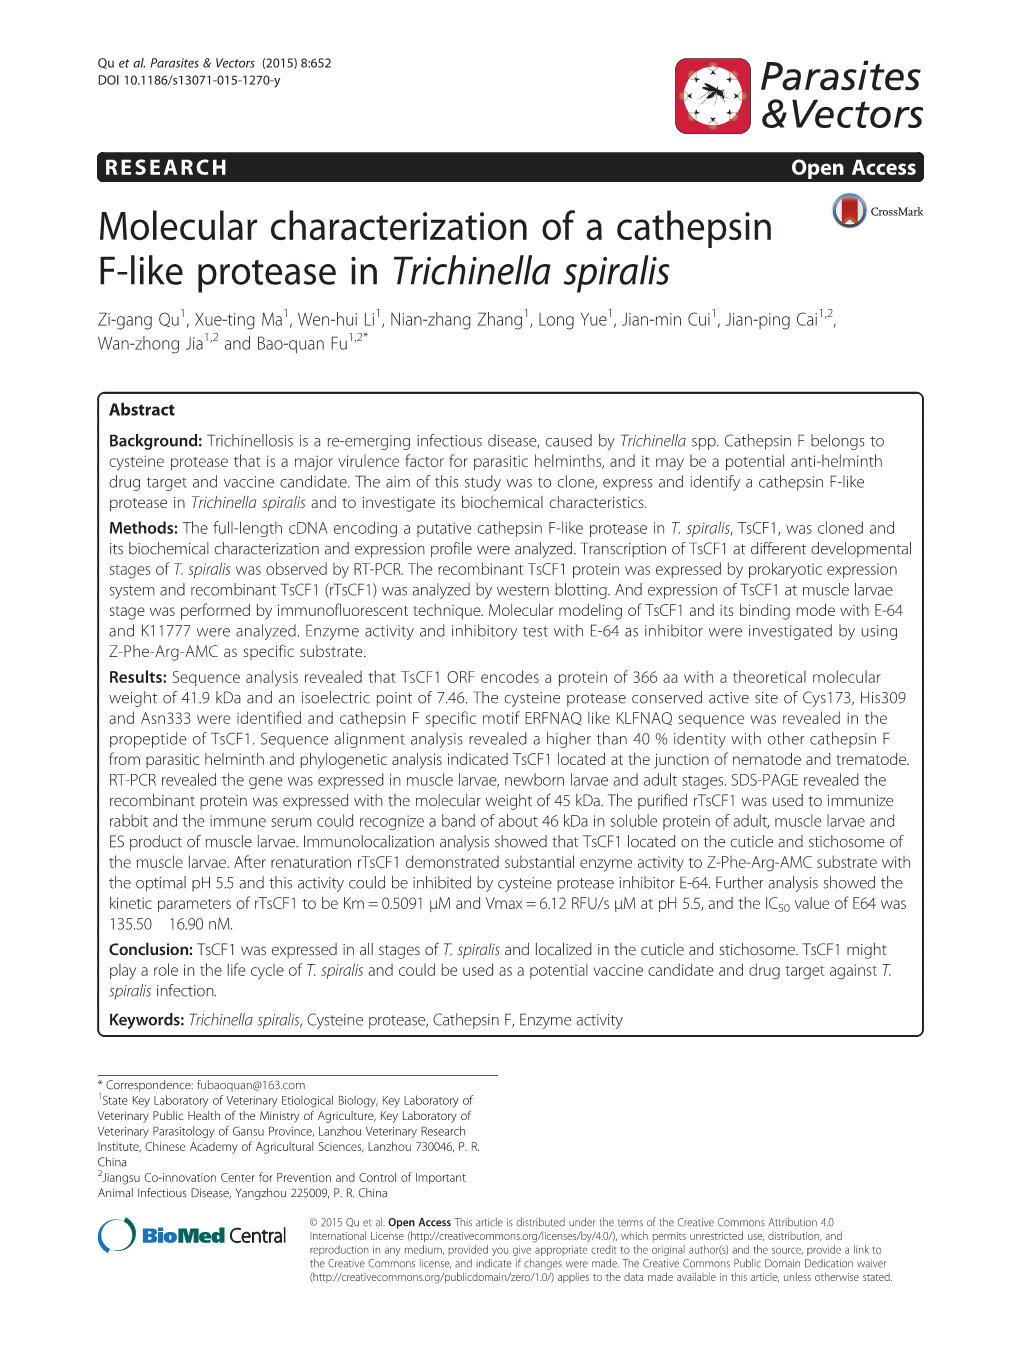 Molecular Characterization of a Cathepsin F-Like Protease In